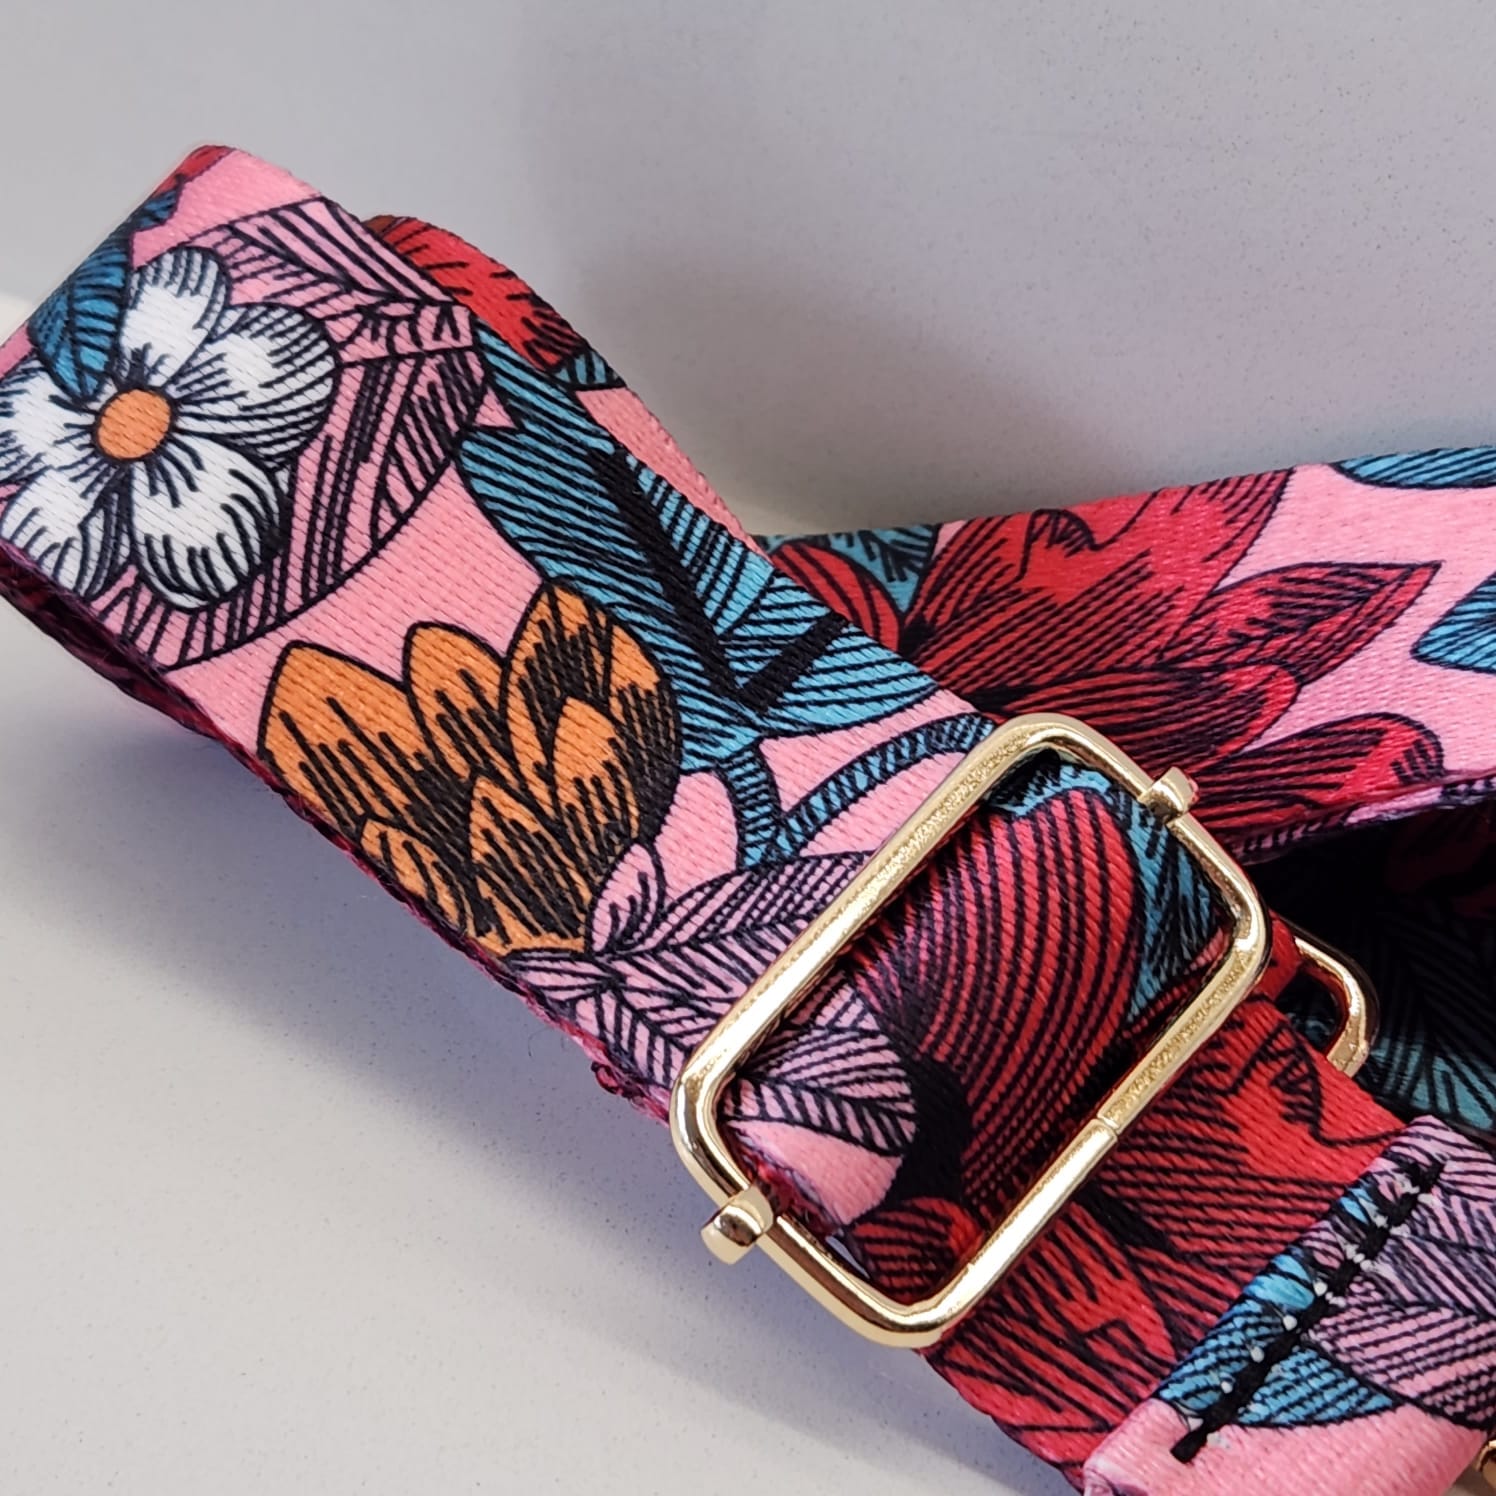 Suprene Bags Bag Accessories Fynbos Bag strap - Printed Collection